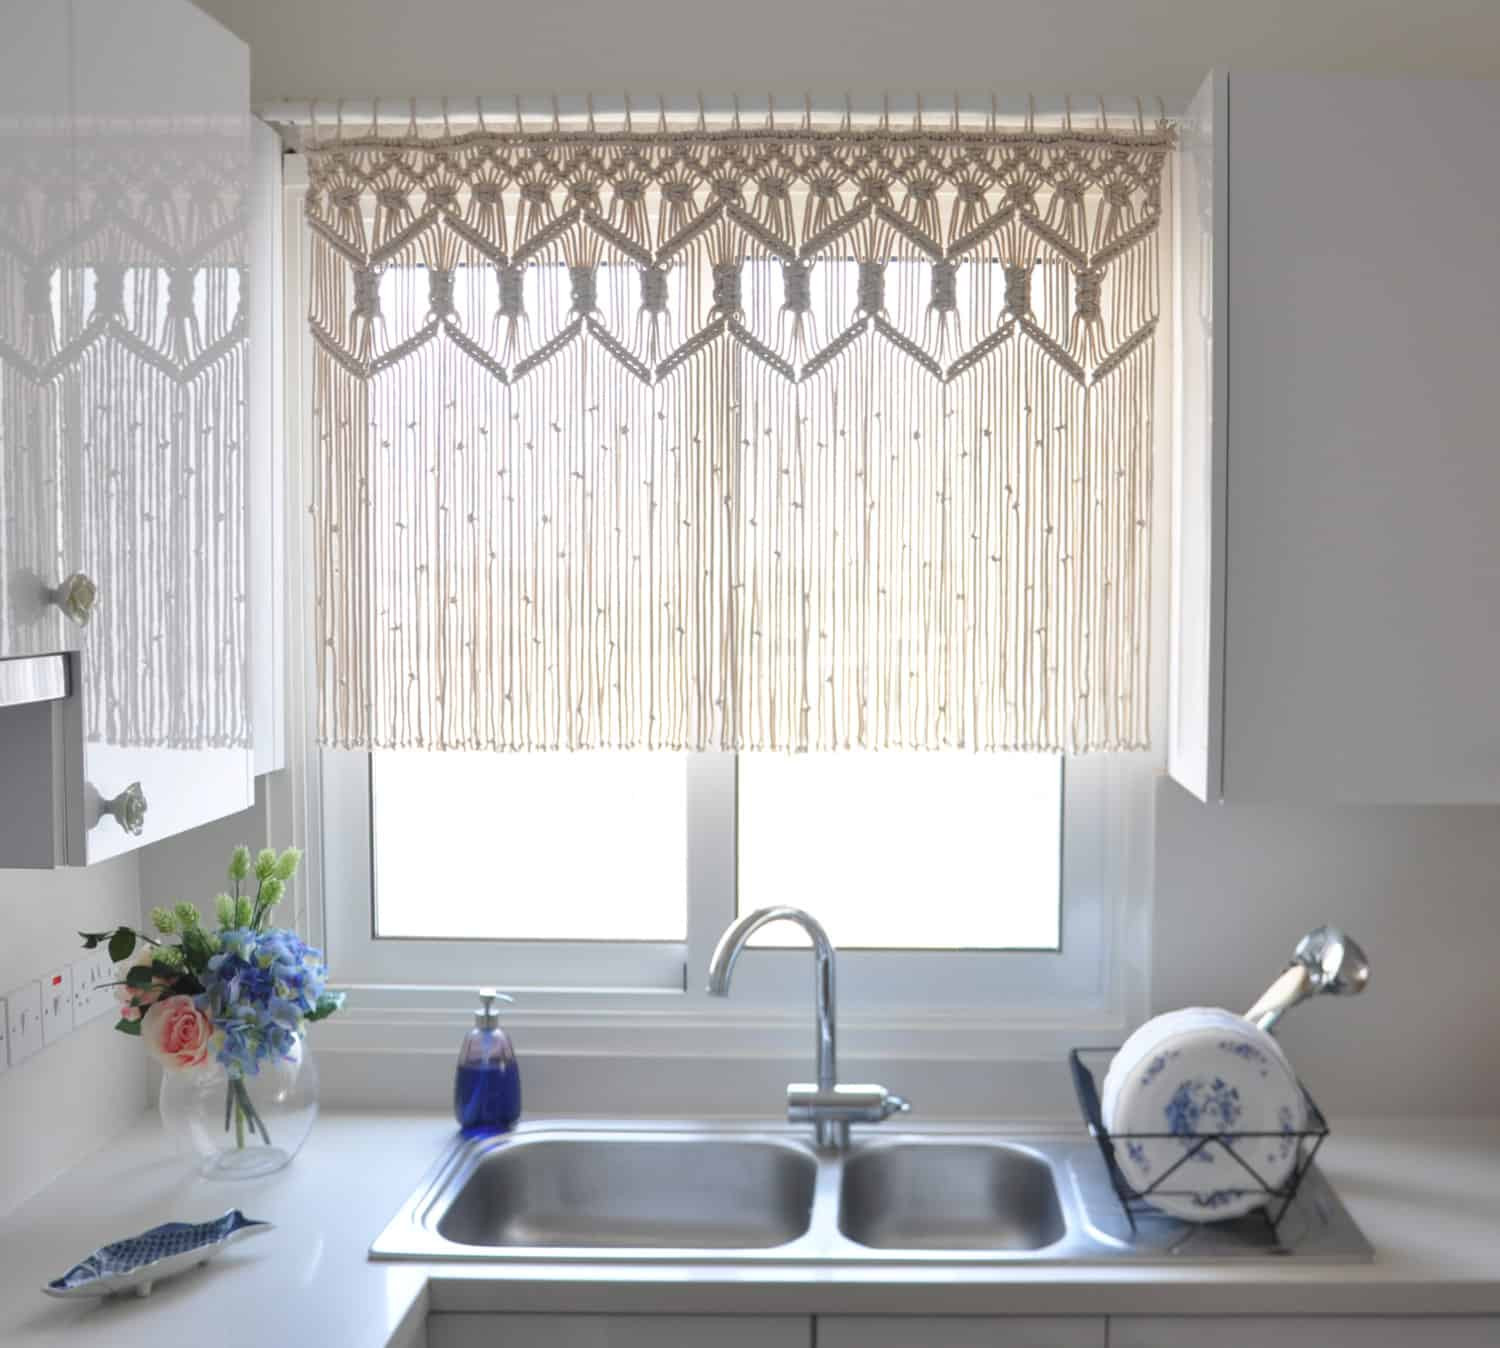 Kitchen Valance Modern
 Selection of Kitchen Curtains for Modern Home Decoration